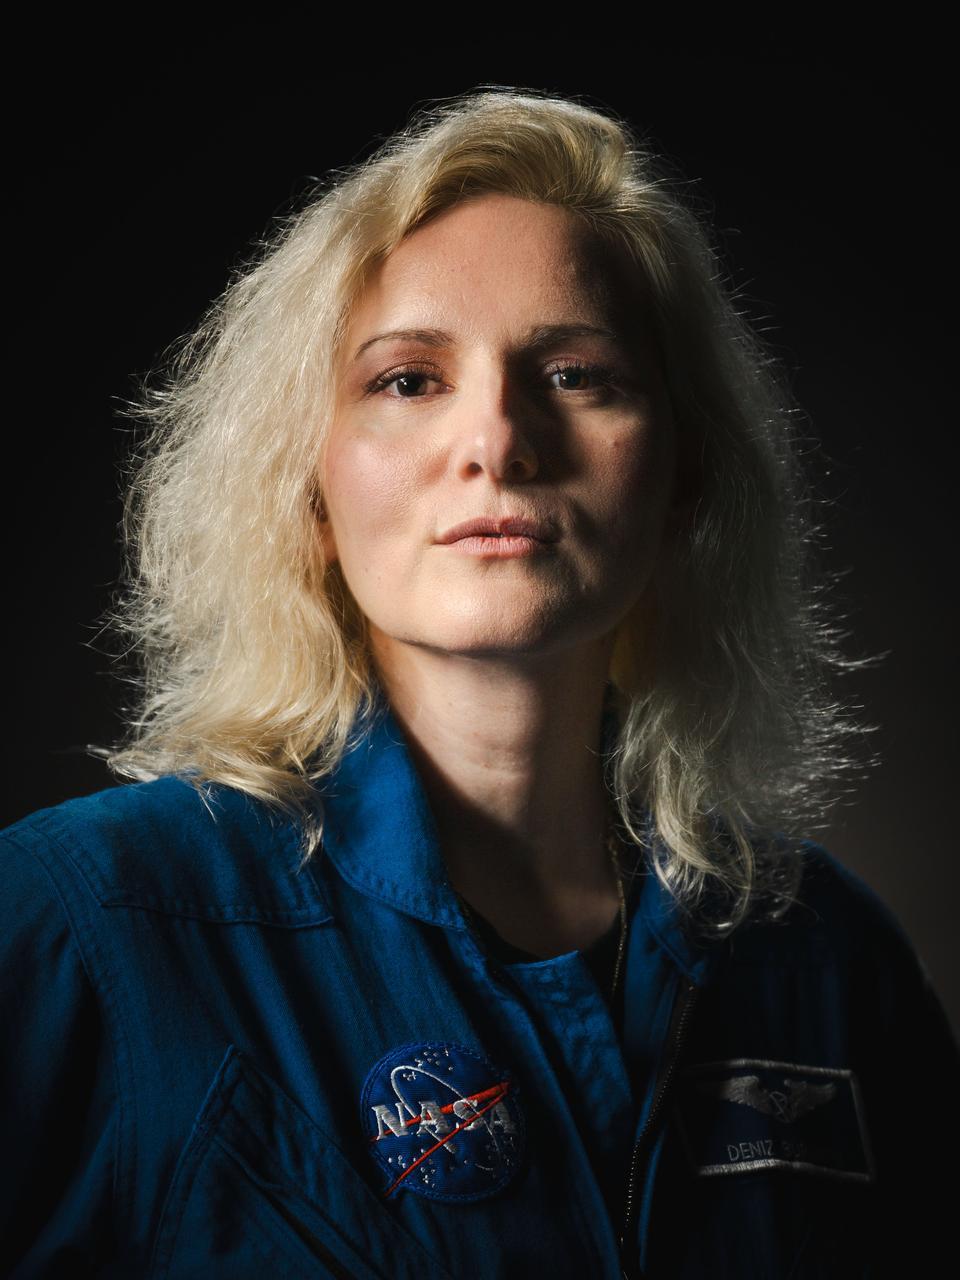 NASA astronaut Deniz Burnham, a white woman, poses for a portrait at NASA's Johnson Space Center in Houston, Texas. She looks directly into the camera as the light highlights her blonde hair. Credit: NASA/Josh Valcarcel